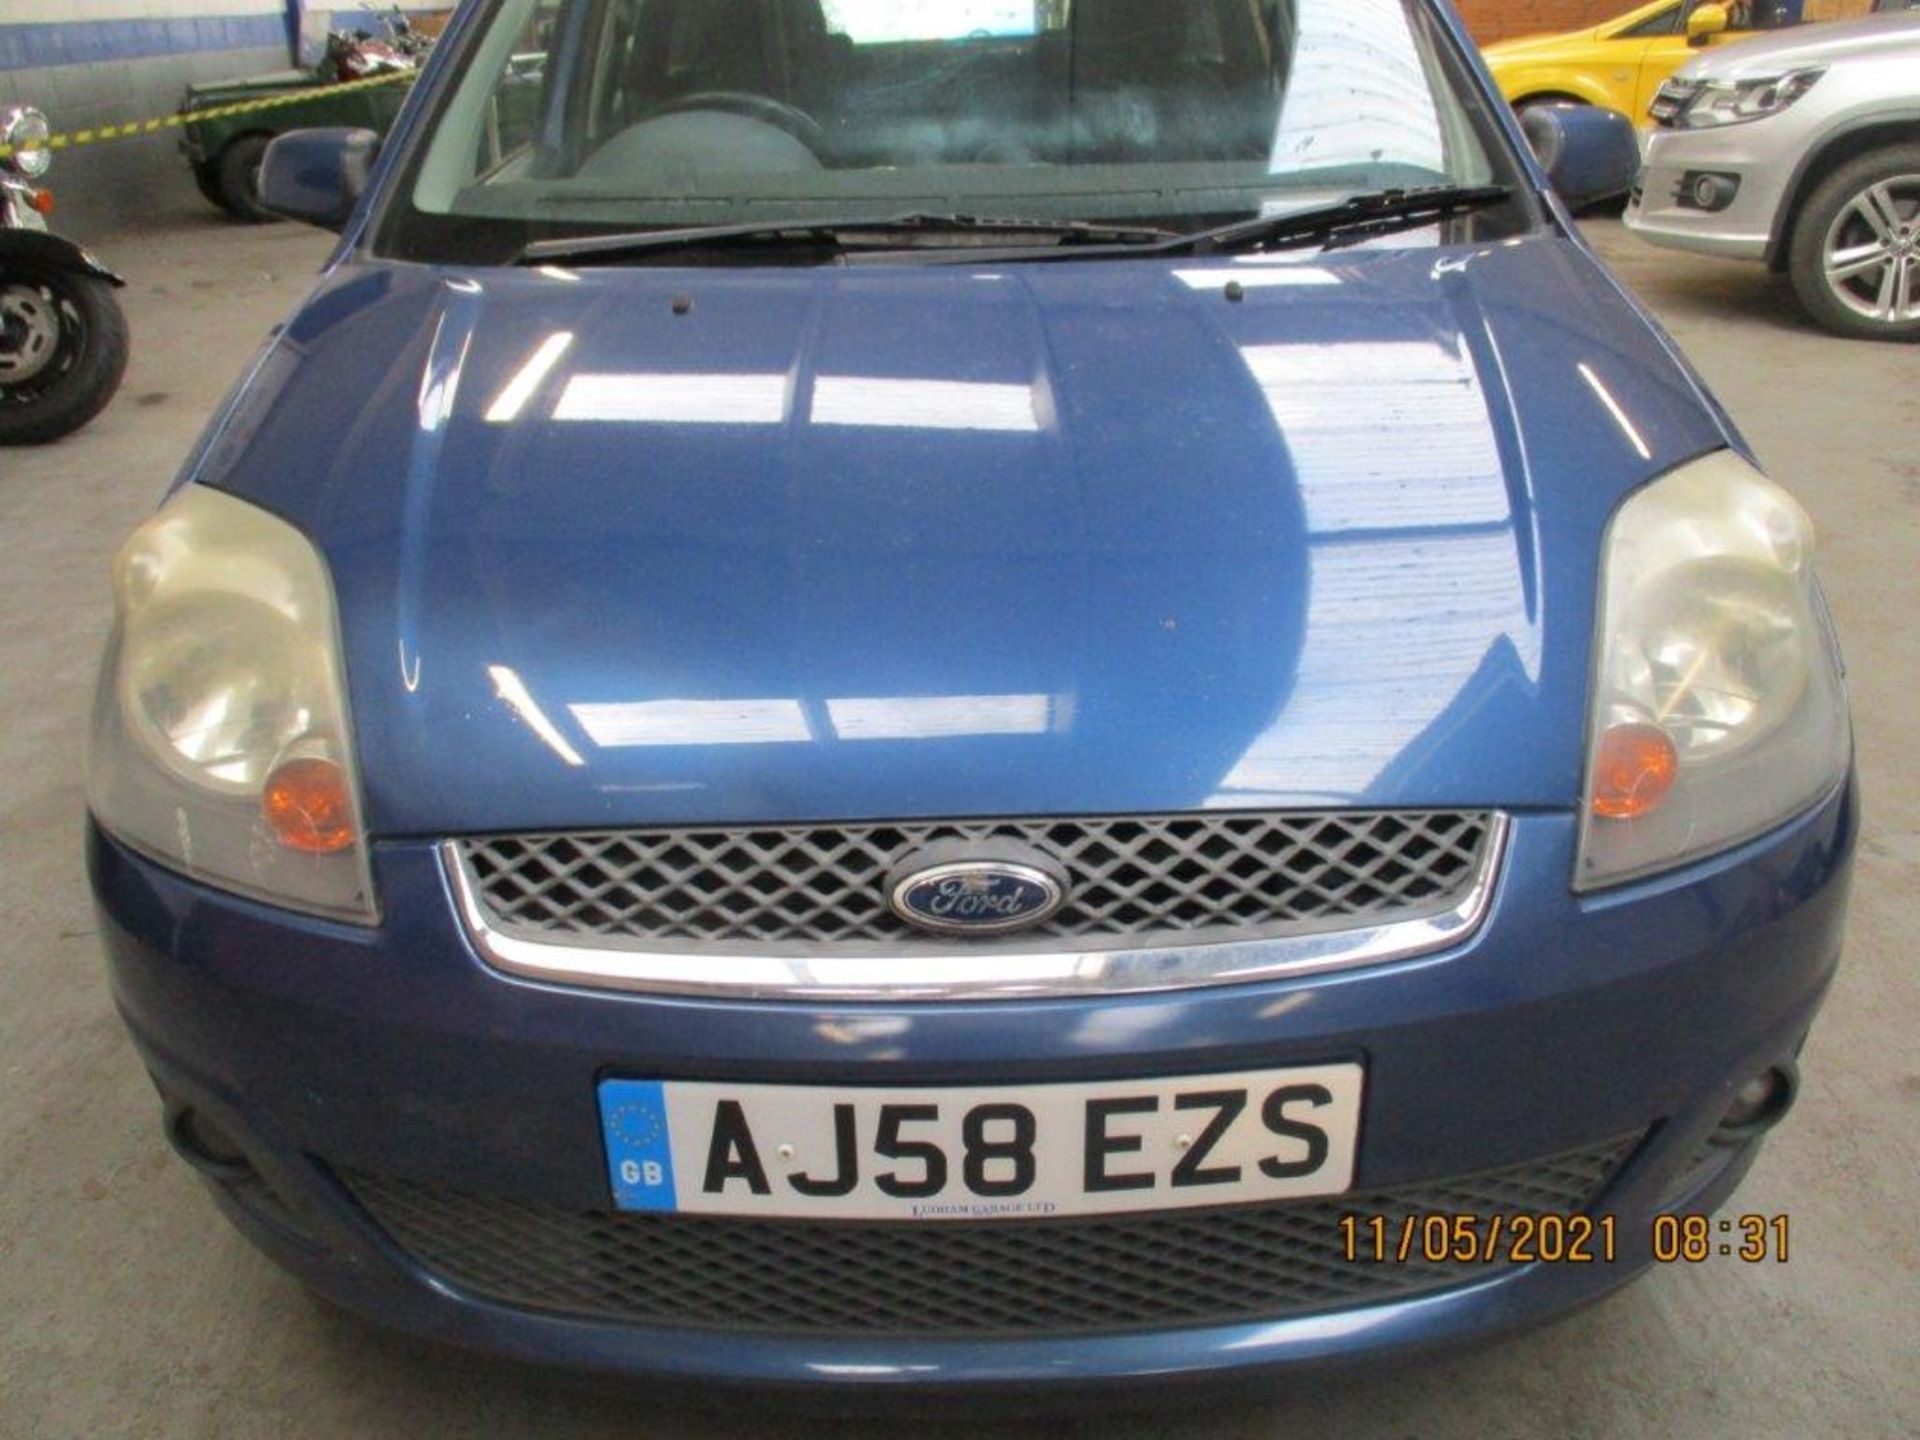 58 08 Ford Fiesta TDCI - Image 5 of 18